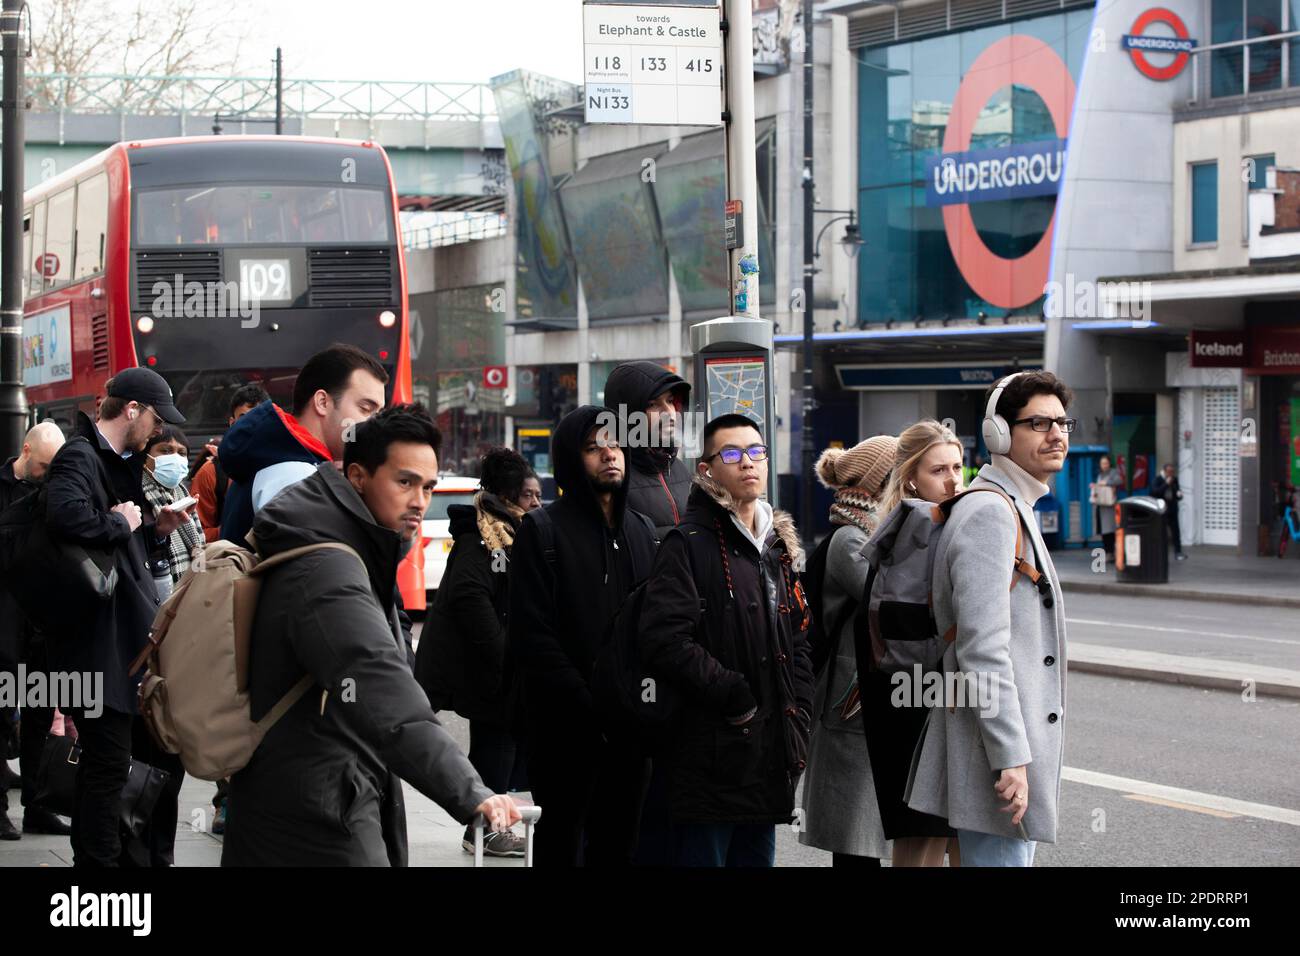 London, UK, 15 March 2023: The RMT and Aslef unions are on strike, completely closing the London Underground today, with a picket line at Brixton station. Commuters squeezed on to buses but sometimes they arrived too full to take on any more passengers. Anna Watson/Alamy Live News Stock Photo